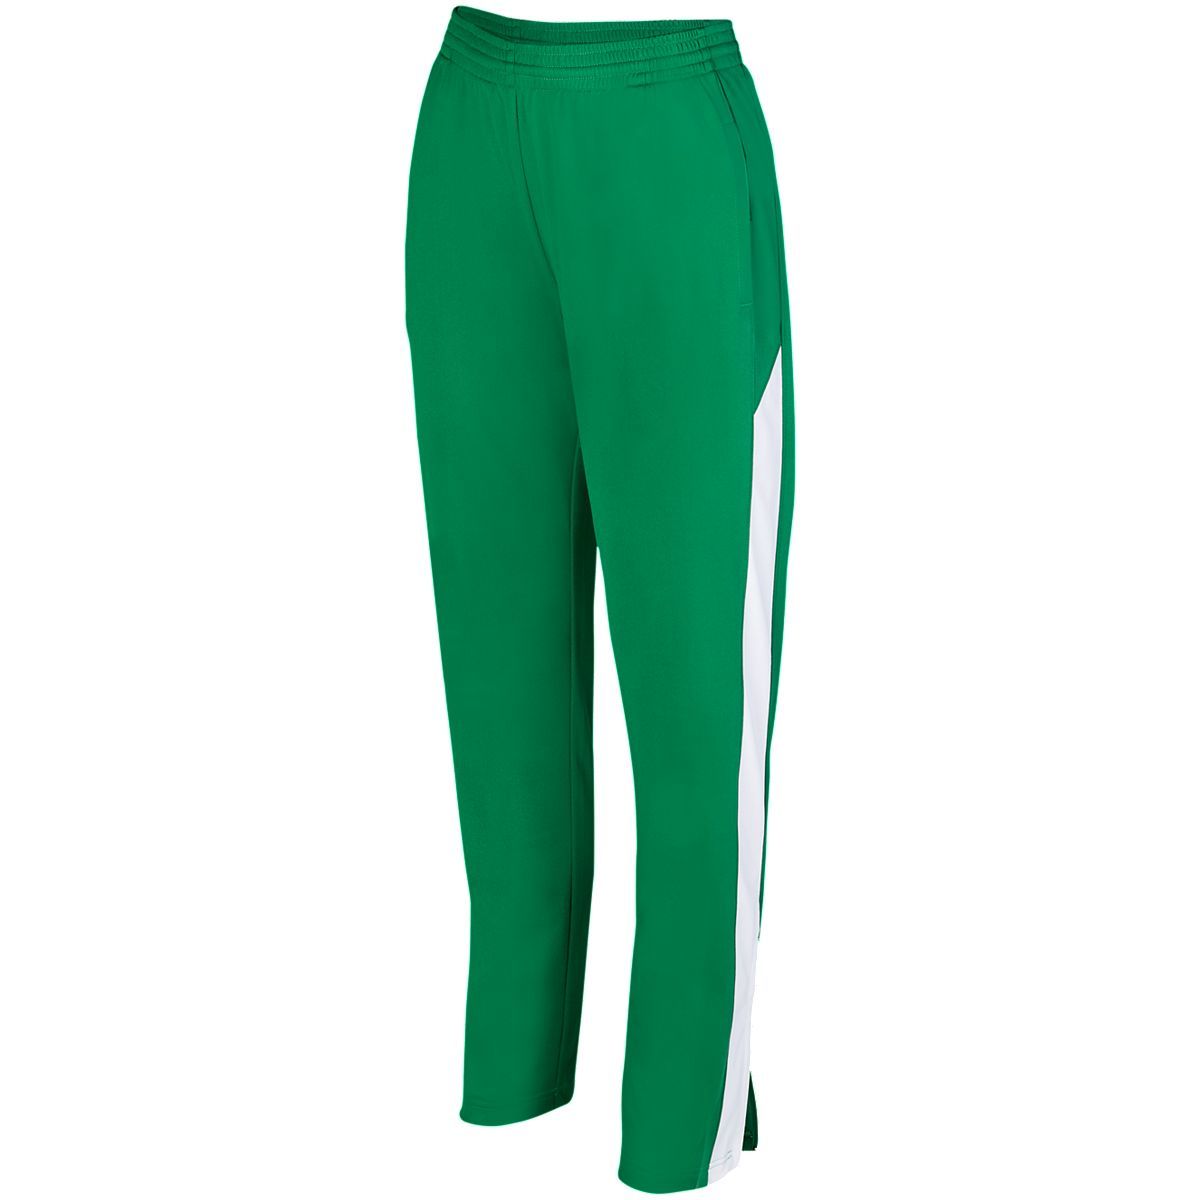 Augusta Sportswear Ladies Medalist Pant 2.0 in Kelly/White  -Part of the Ladies, Ladies-Pants, Pants, Augusta-Products product lines at KanaleyCreations.com